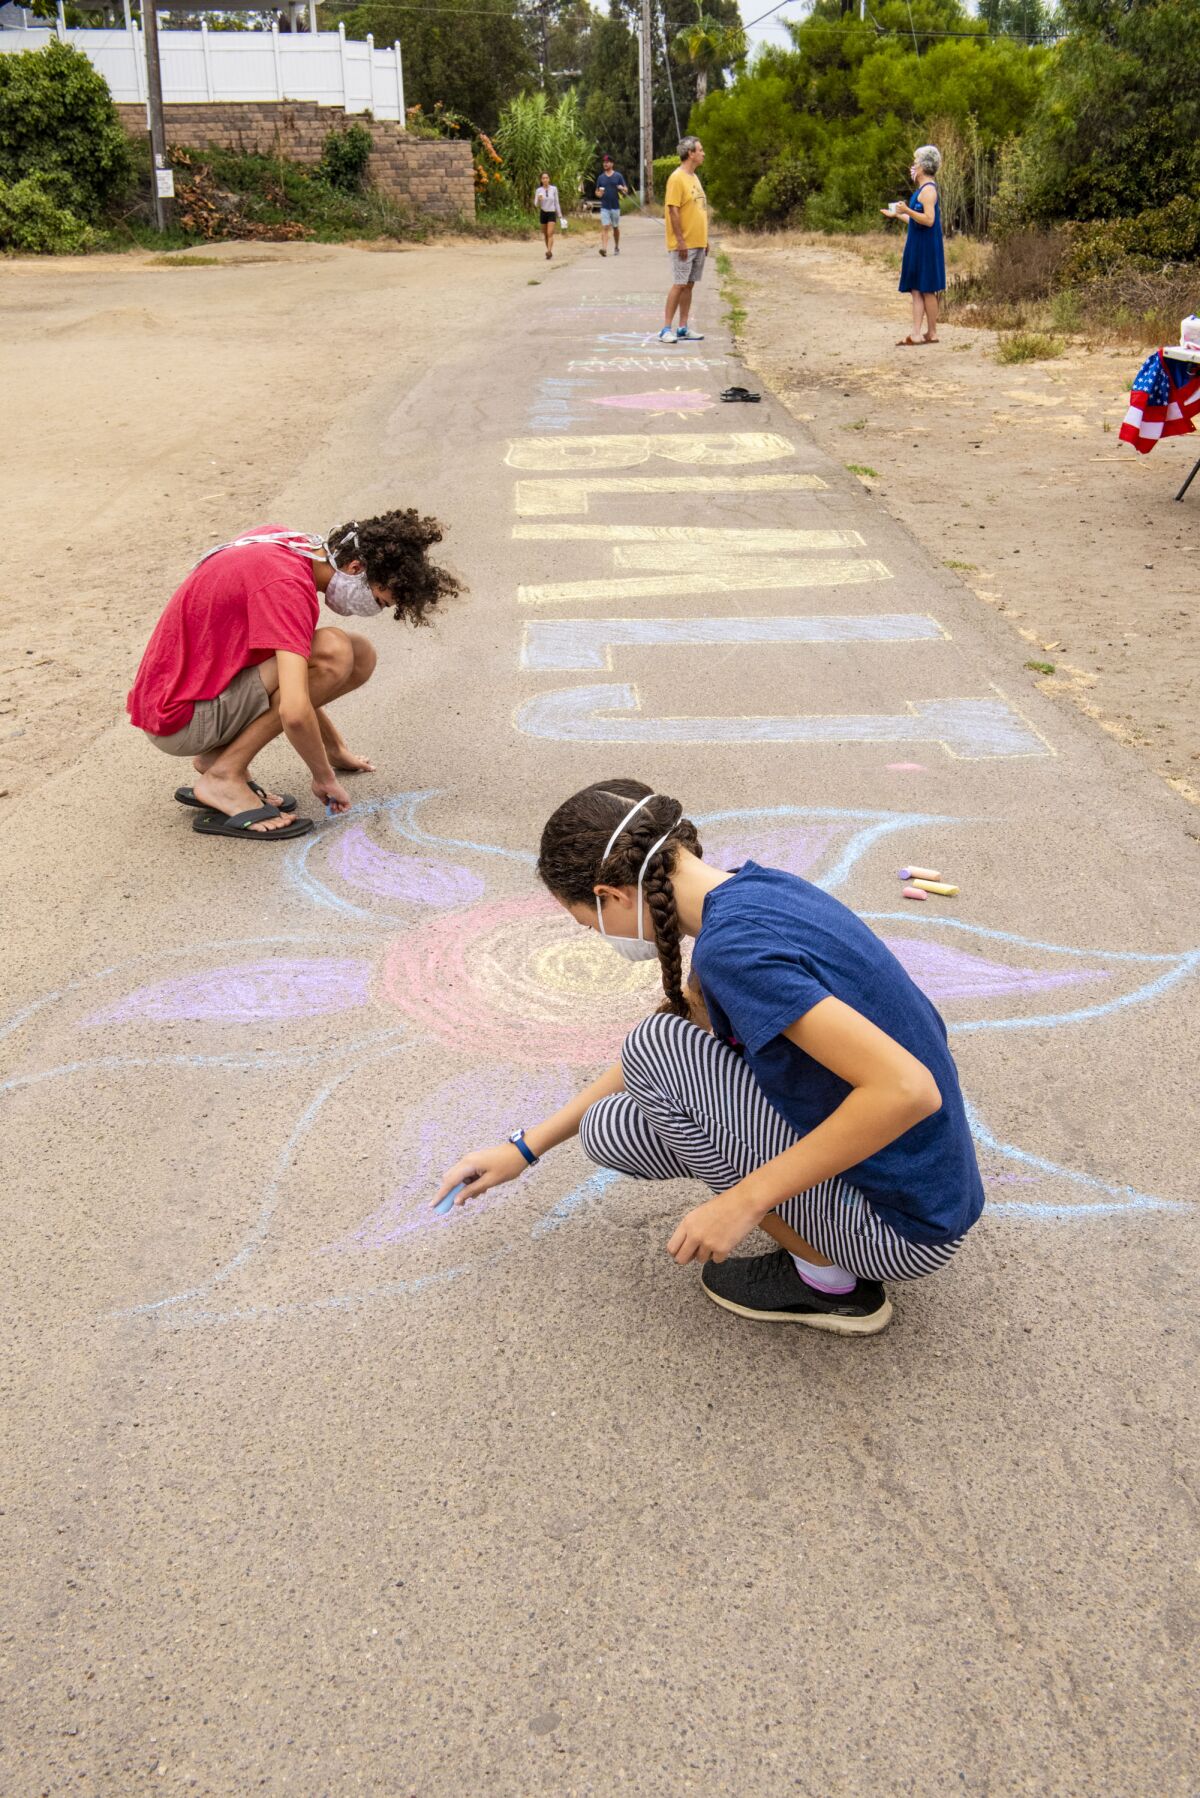 Participants in a Labor Day chalk-in draw images on the La Jolla Bike Path to support the Black Lives Matter movement.